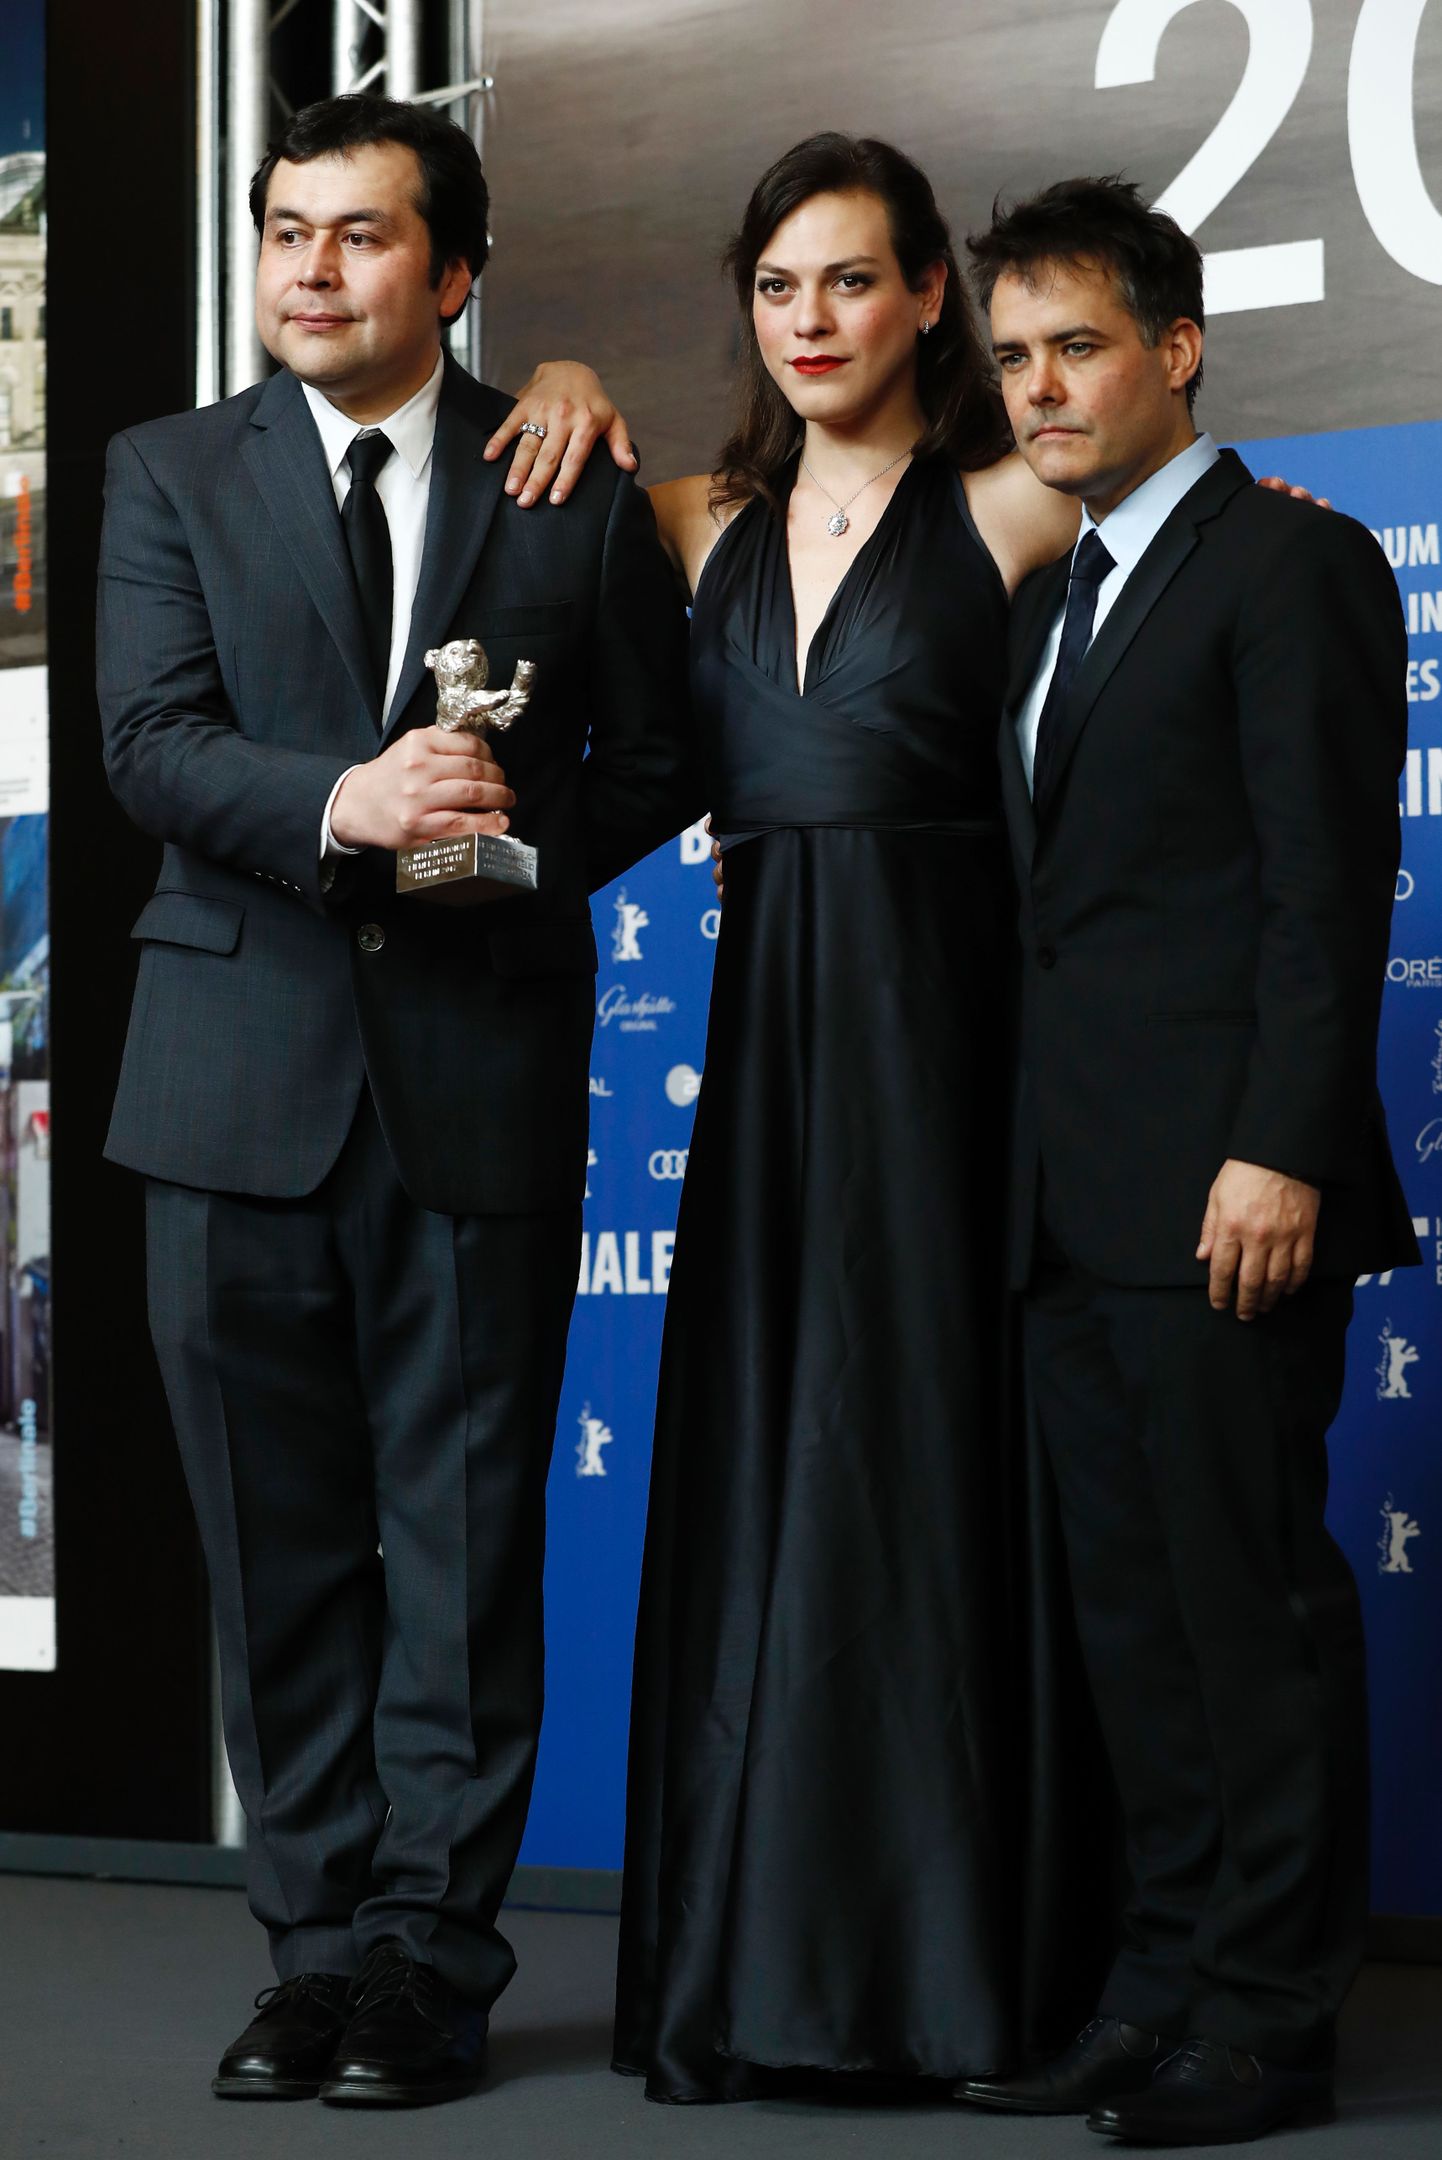 (L-R) Screenwriter Gonzalo Maza, Colombian actress Daniela Vega and Chilean director Sebastian Lelio pose during a press conference after being awarded with the Silver bear for best screenplay for their movie "A Fantastic Woman (Una mujer fant